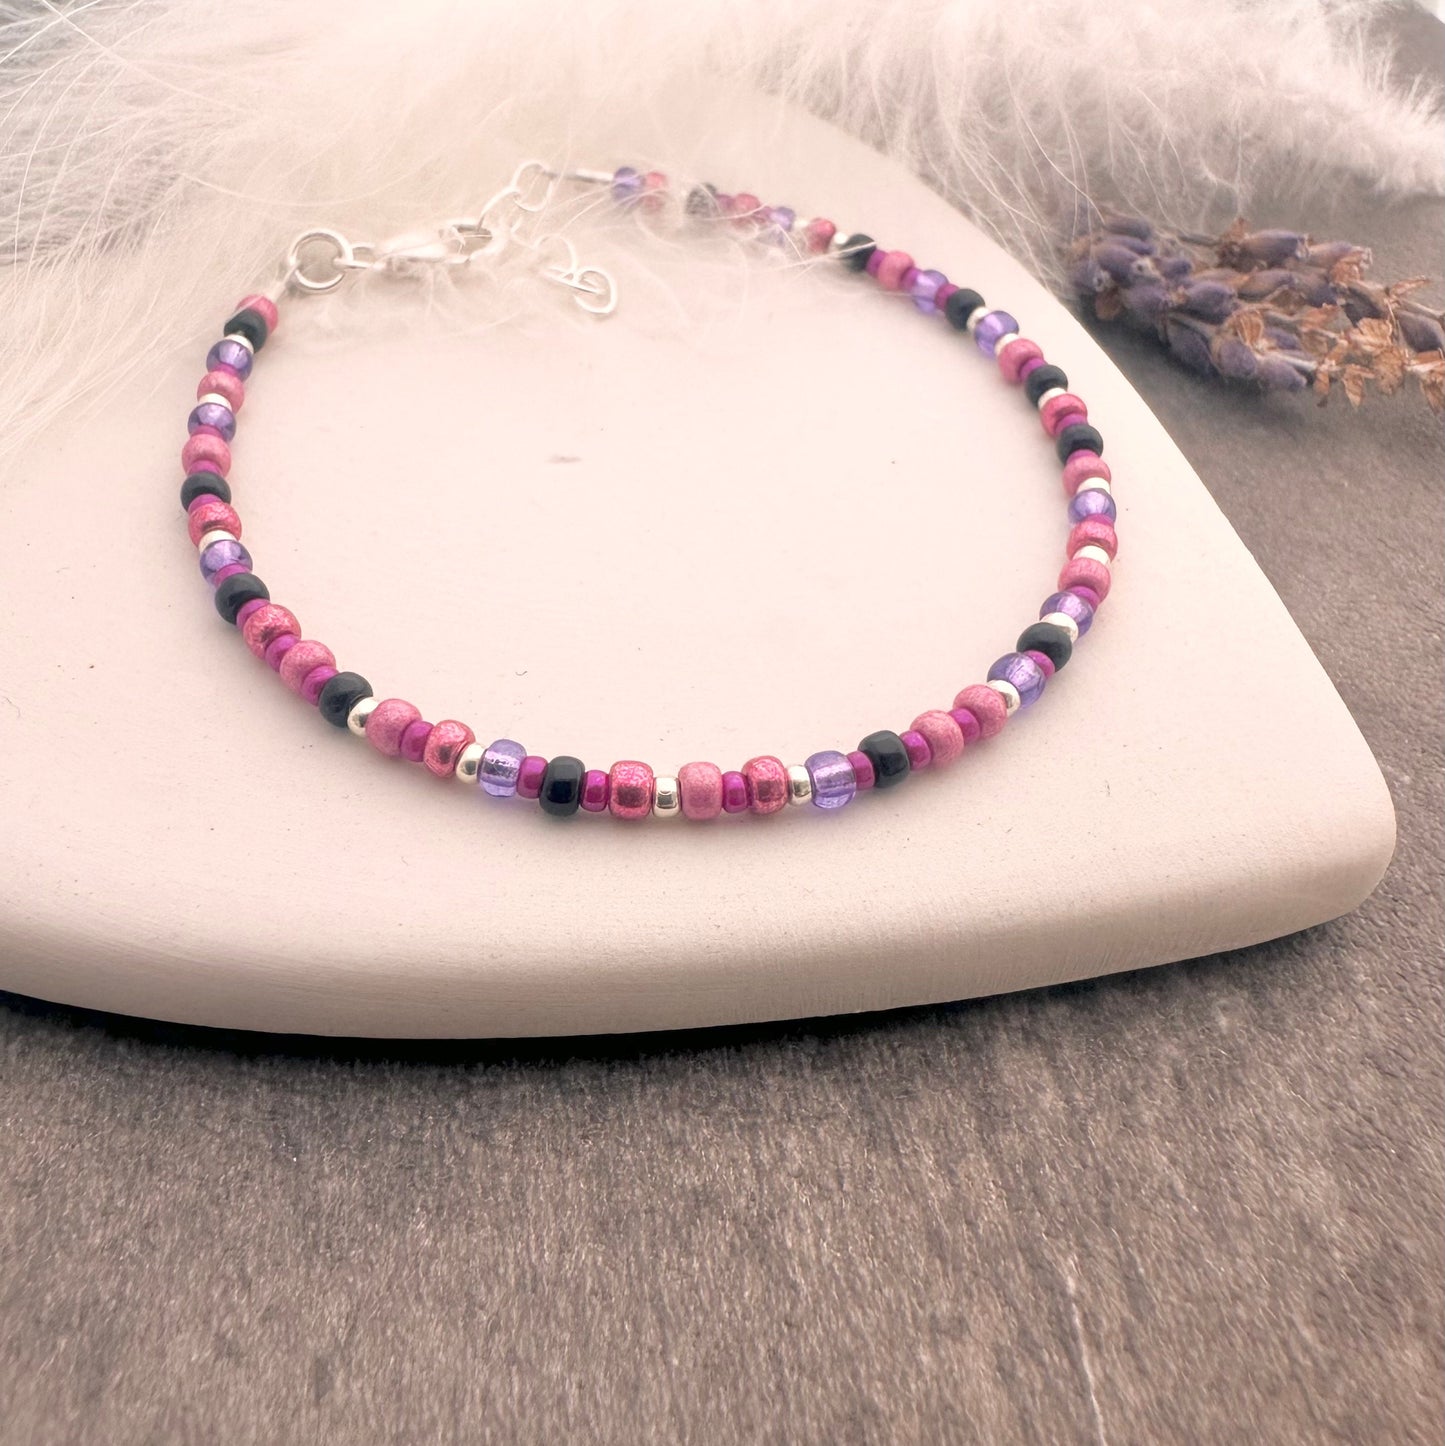 Berry Bracelet with seed beads shades of pink purple black